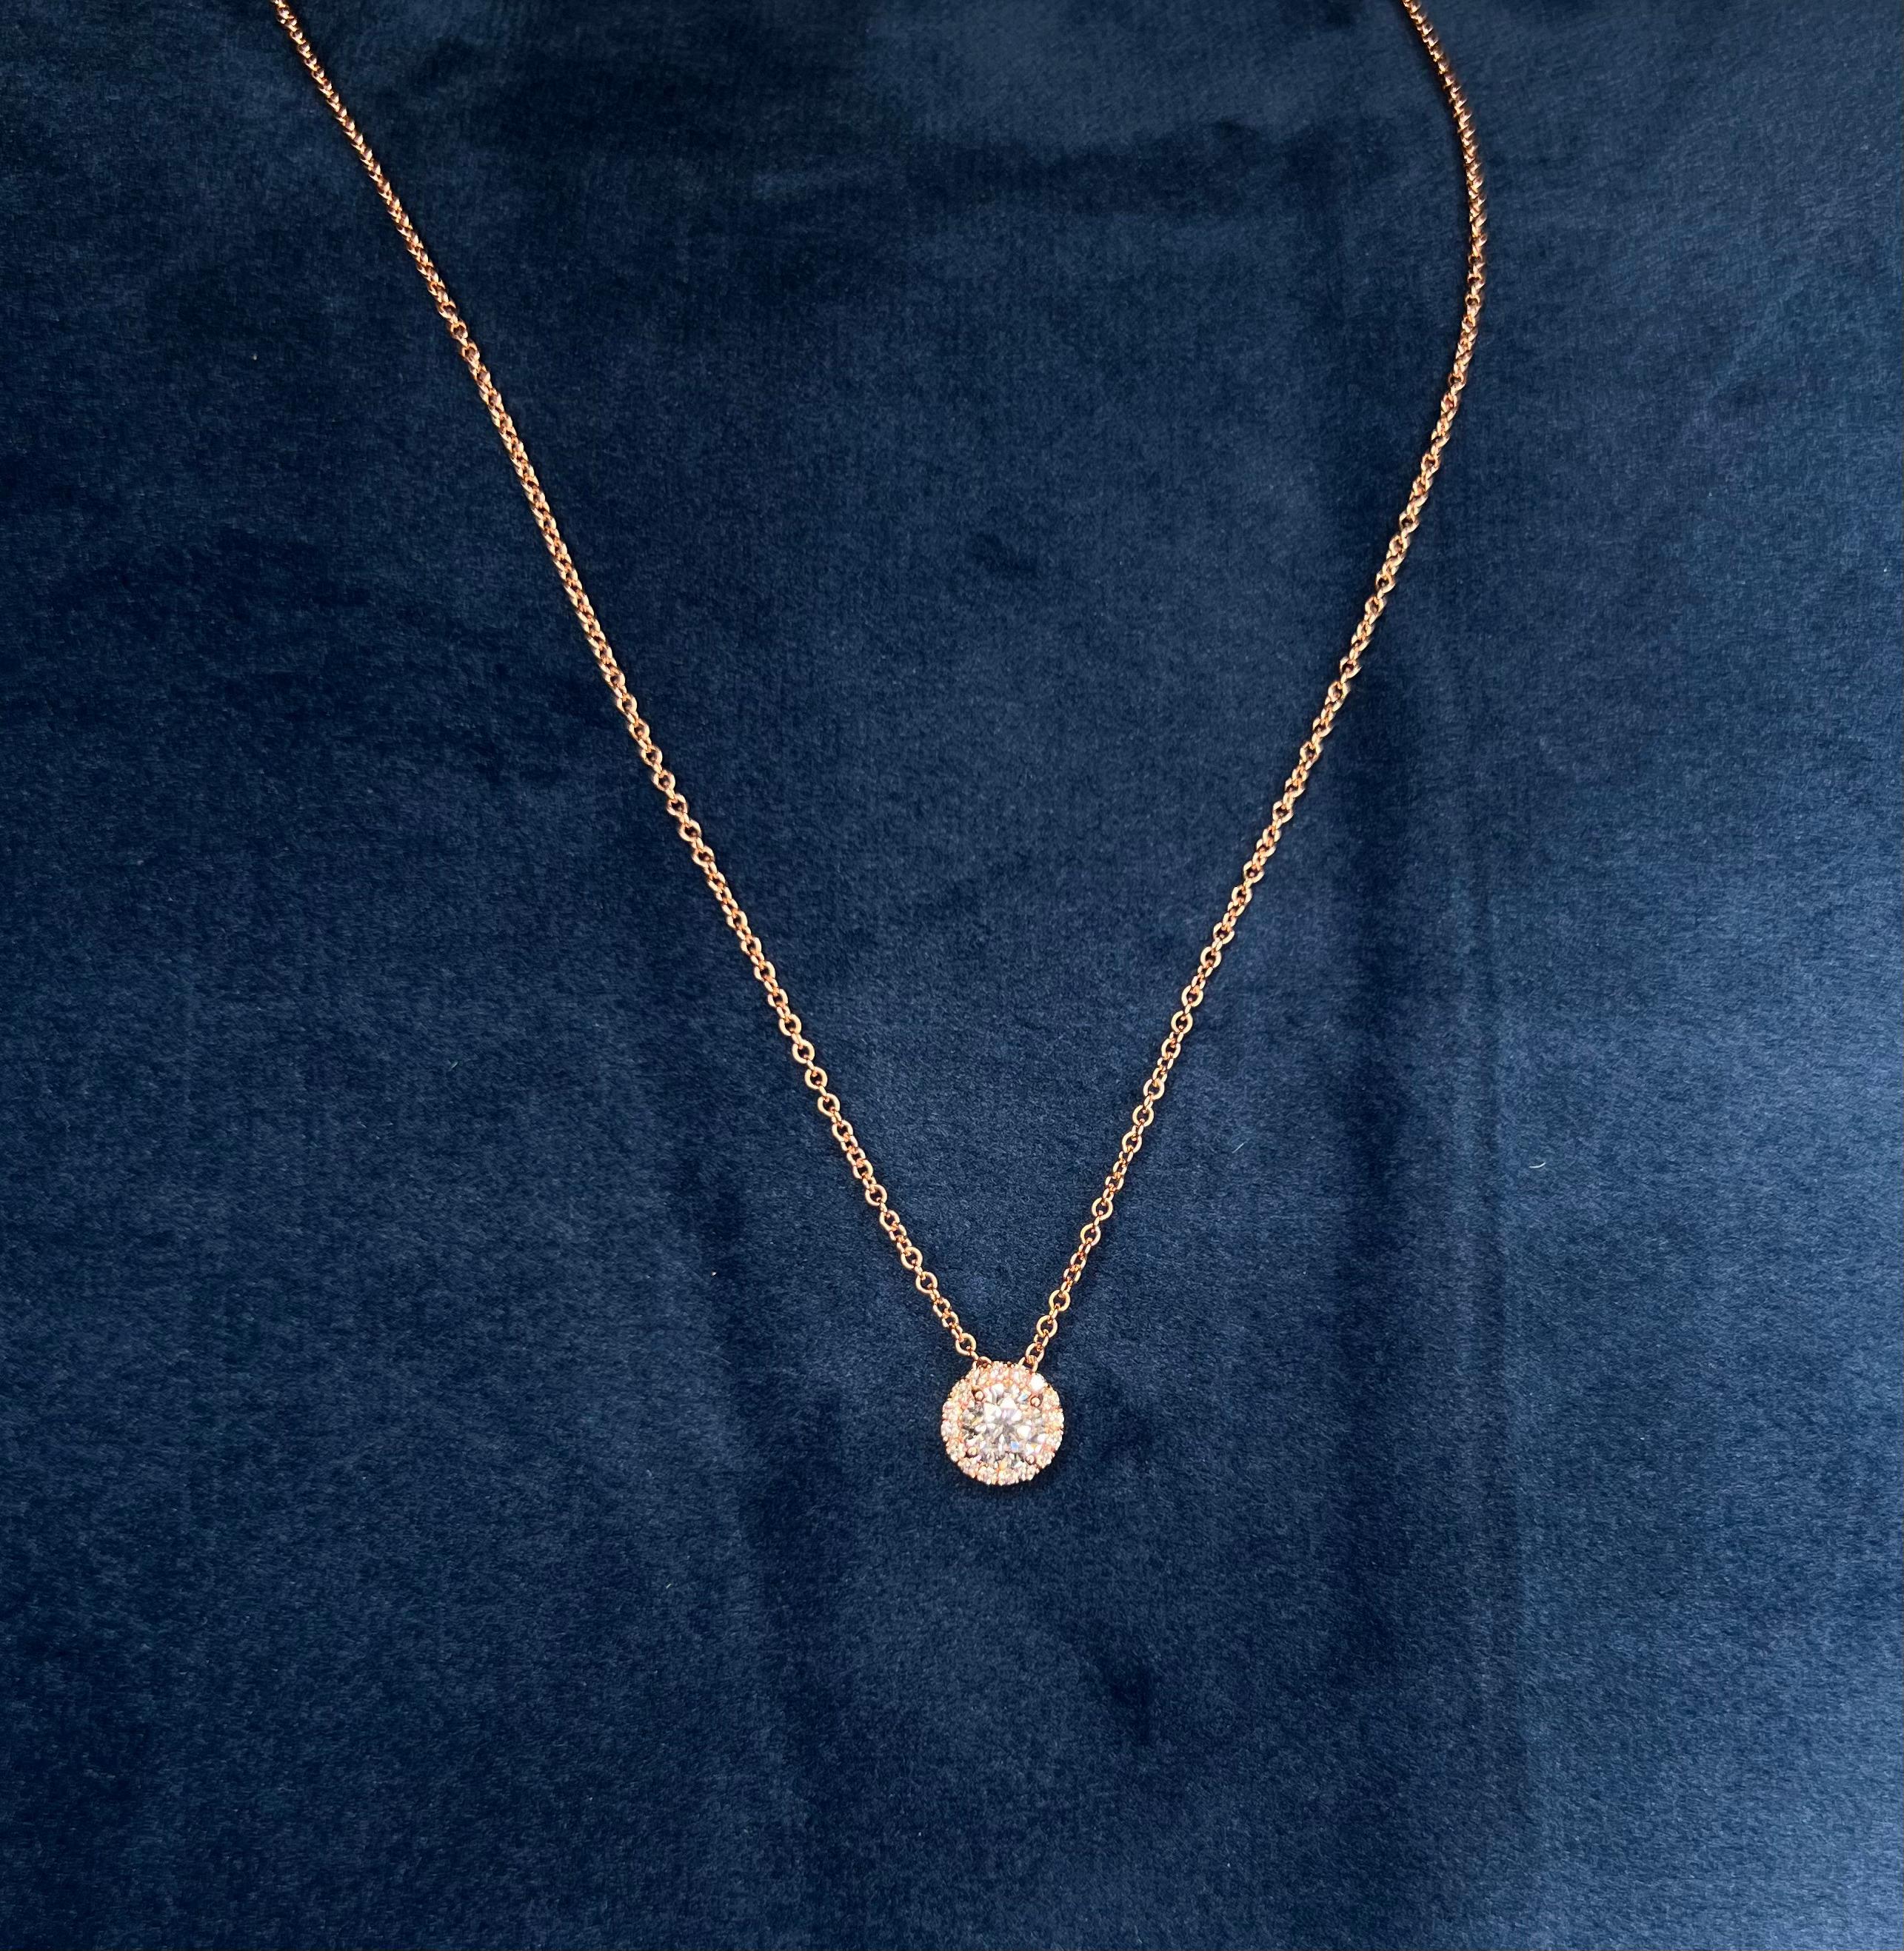 14k Rose Gold 1.15 Carat Round Cut Diamond Solitaire Pendant Necklace In New Condition For Sale In Los Angeles, CA